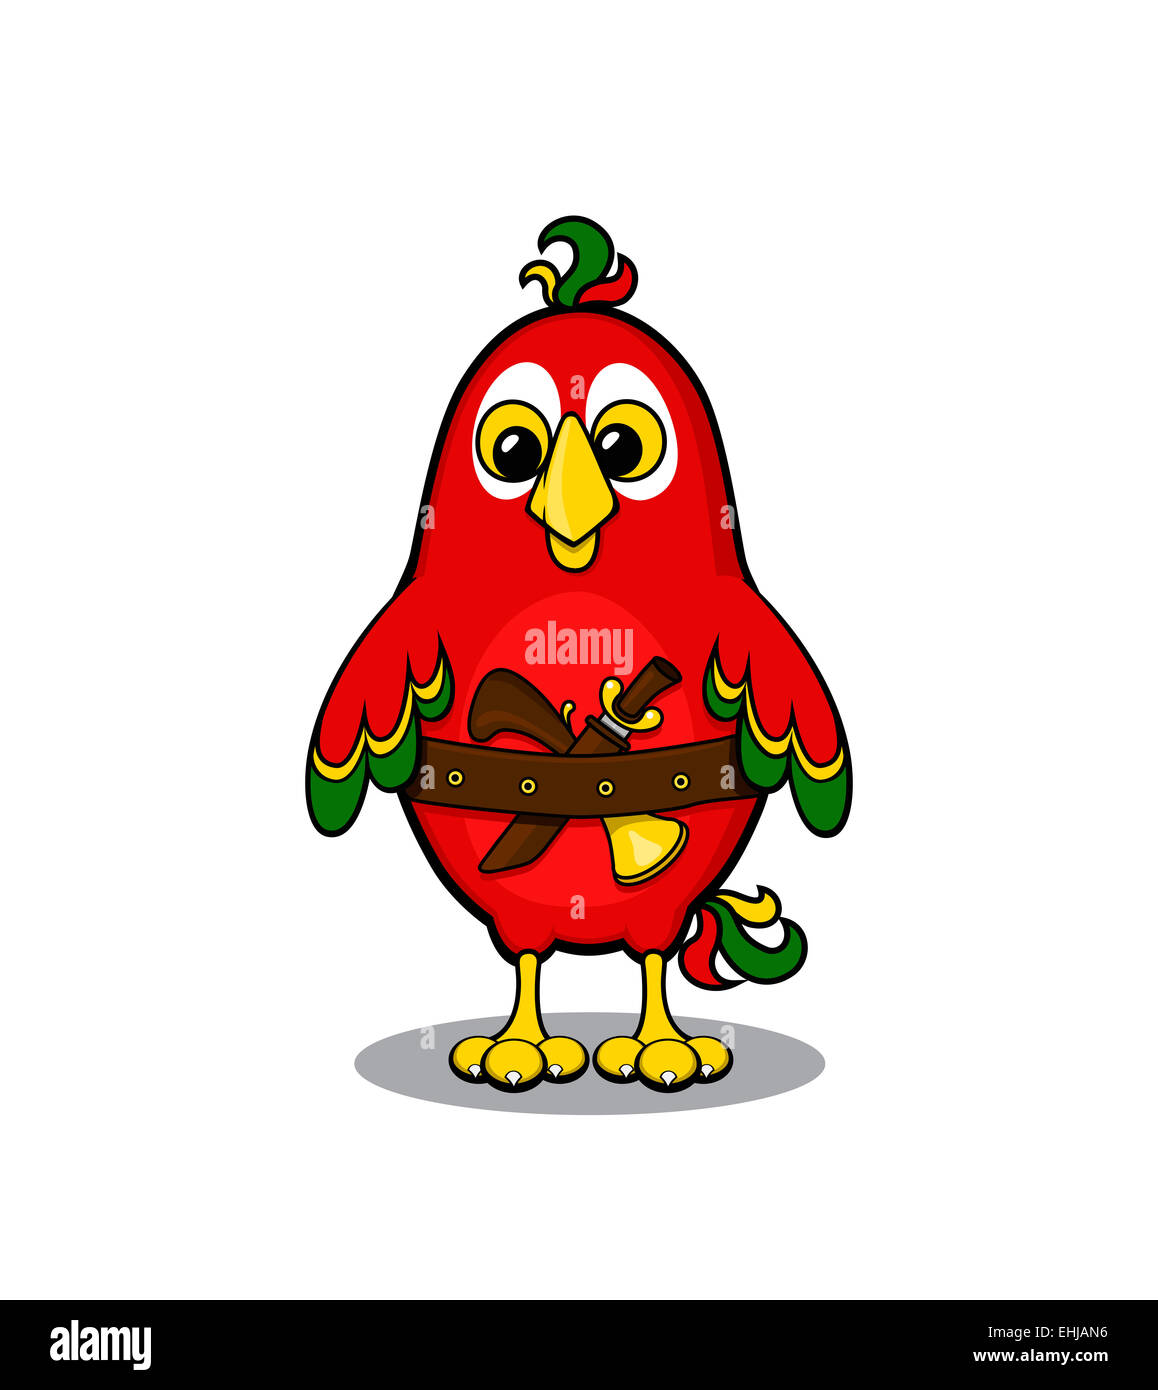 Cute cartoon pirate red parrot. Vector illustration. Stock Photo